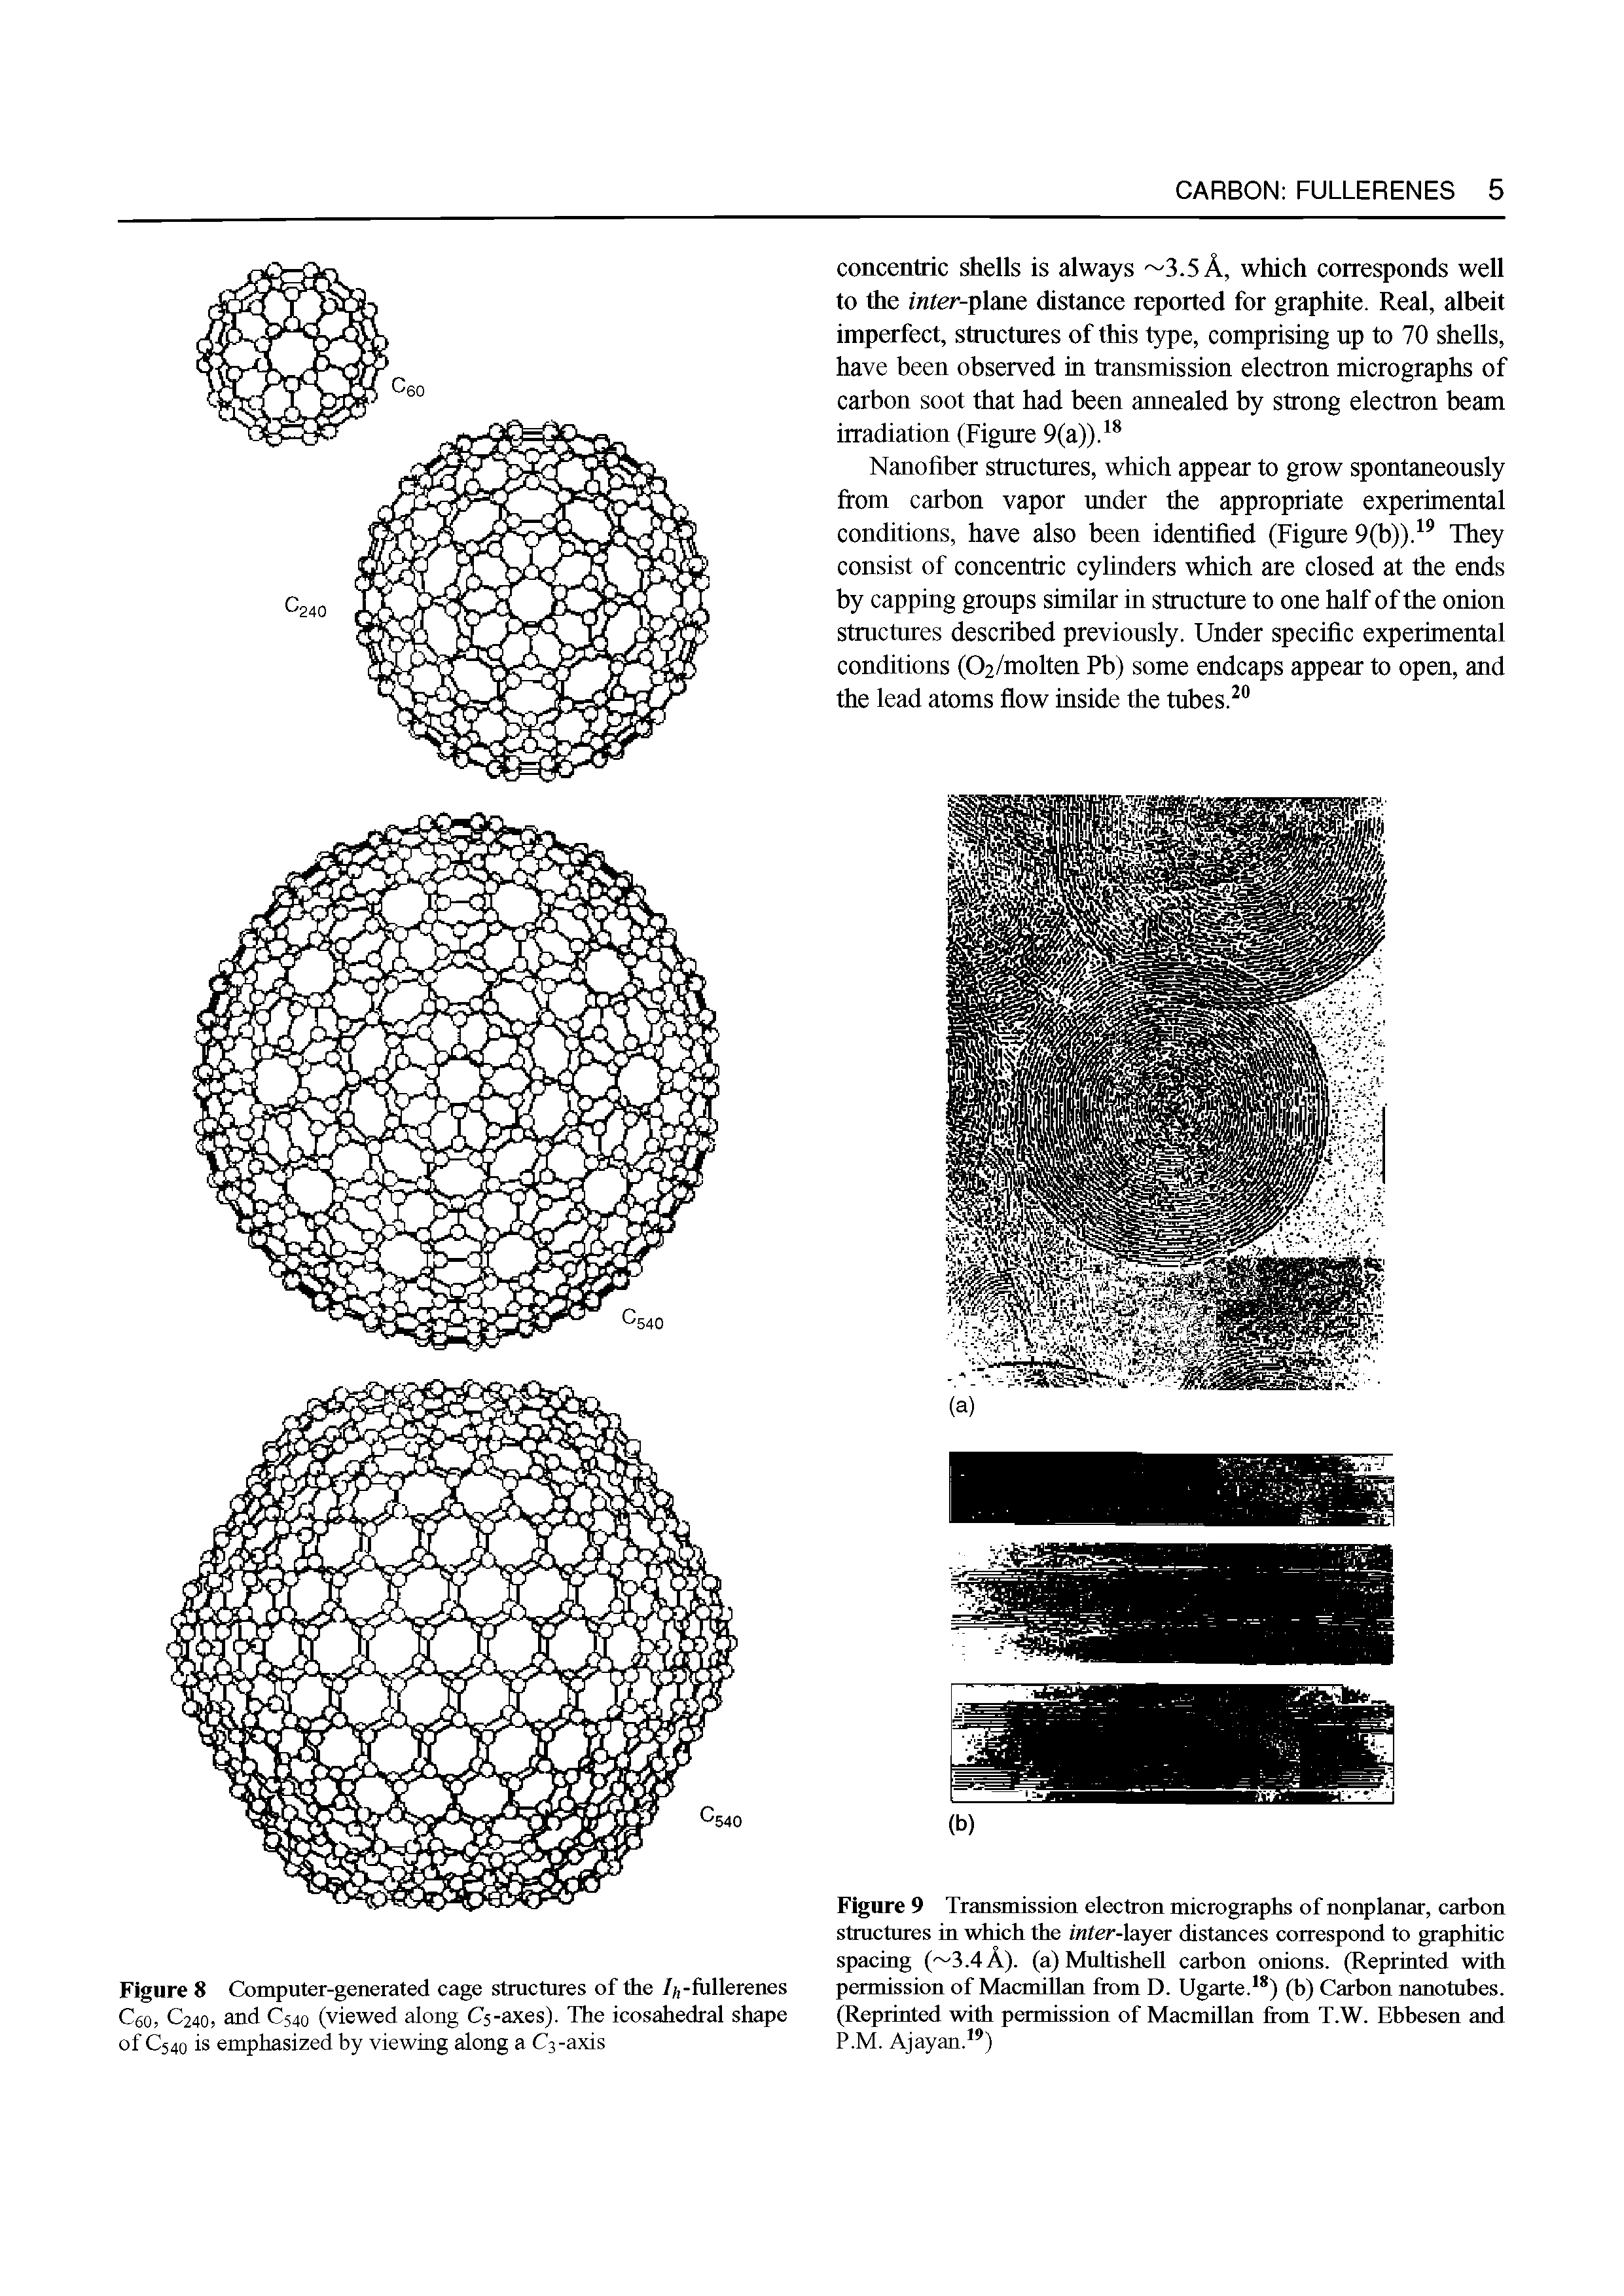 Figure 9 Transmission electron micrographs of nonplanar, carhon structures in which the inter-layer distances correspond to graphitic spacing ( 3.4A). (a) MultisheU carbon onions. (Reprinted with permission of MacmiUan from D. Ugarte. ) (h) Carhon nanotuhes. (Reprinted with permission of Macmillan from T.W. Ehhesen and P.M. Ajayan. )...